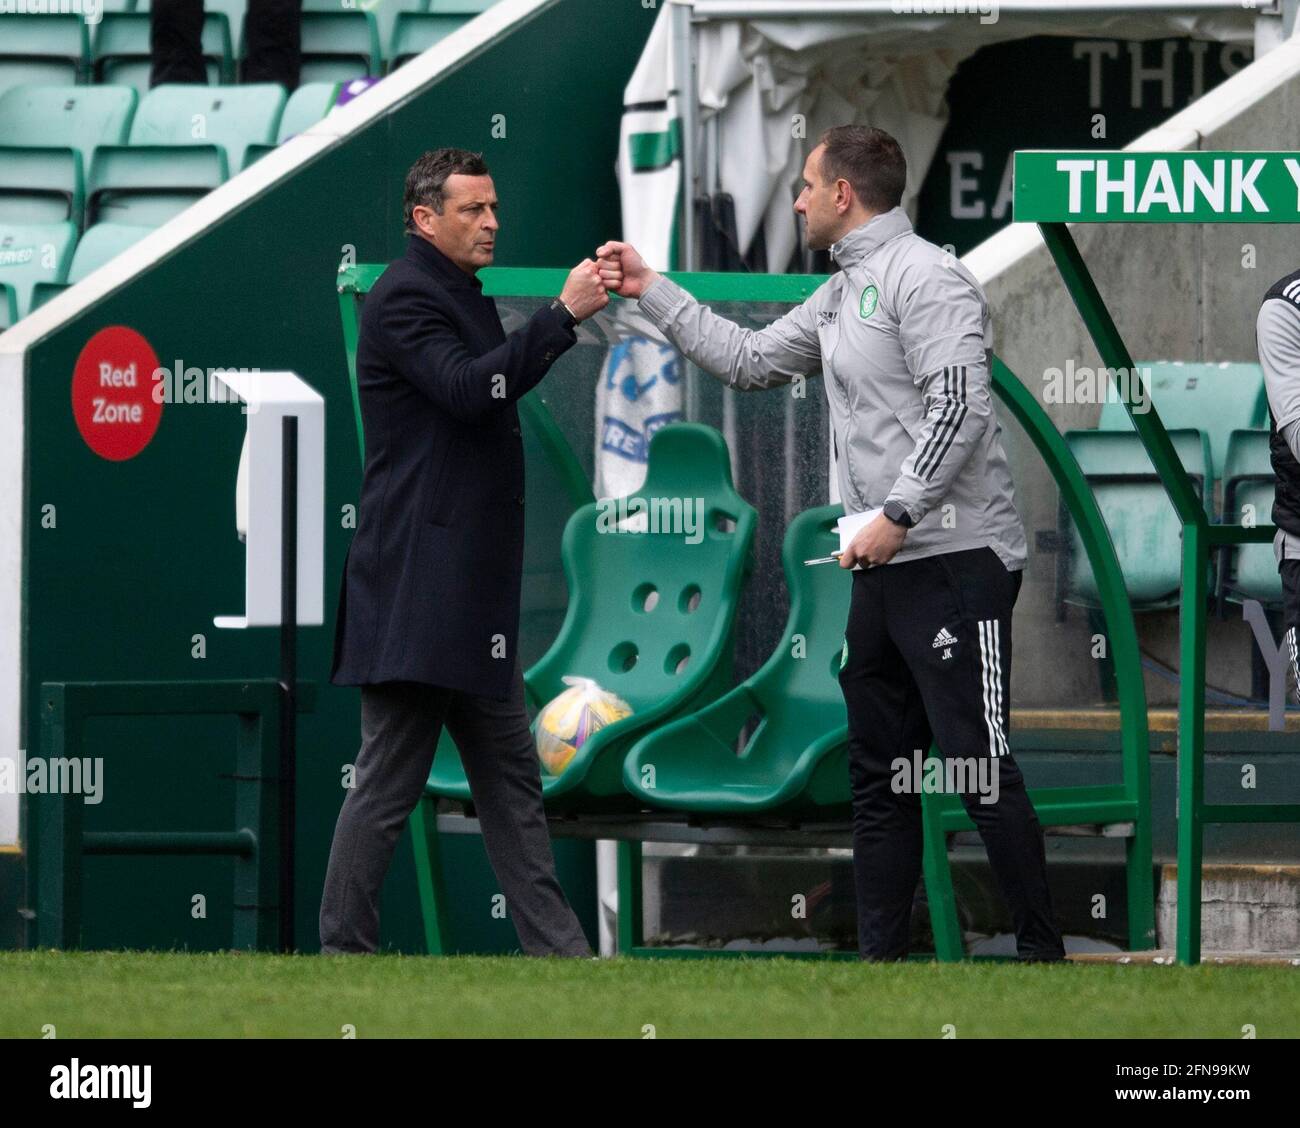 Scottish Premiership - Hibernian v Celtic. Easter Road Stadium, Edinburgh, Midlothian, UK. 15th May, 2021. Hibs play host to Celtic in the Scottish Premier League at Easter road, Edinburgh. Pic shows: HibsÕ Manager, Jack Ross, and Celtic's interim manager, John Kennedy, bump fists at the end of the game. Credit: Ian Jacobs/Alamy Live News Stock Photo